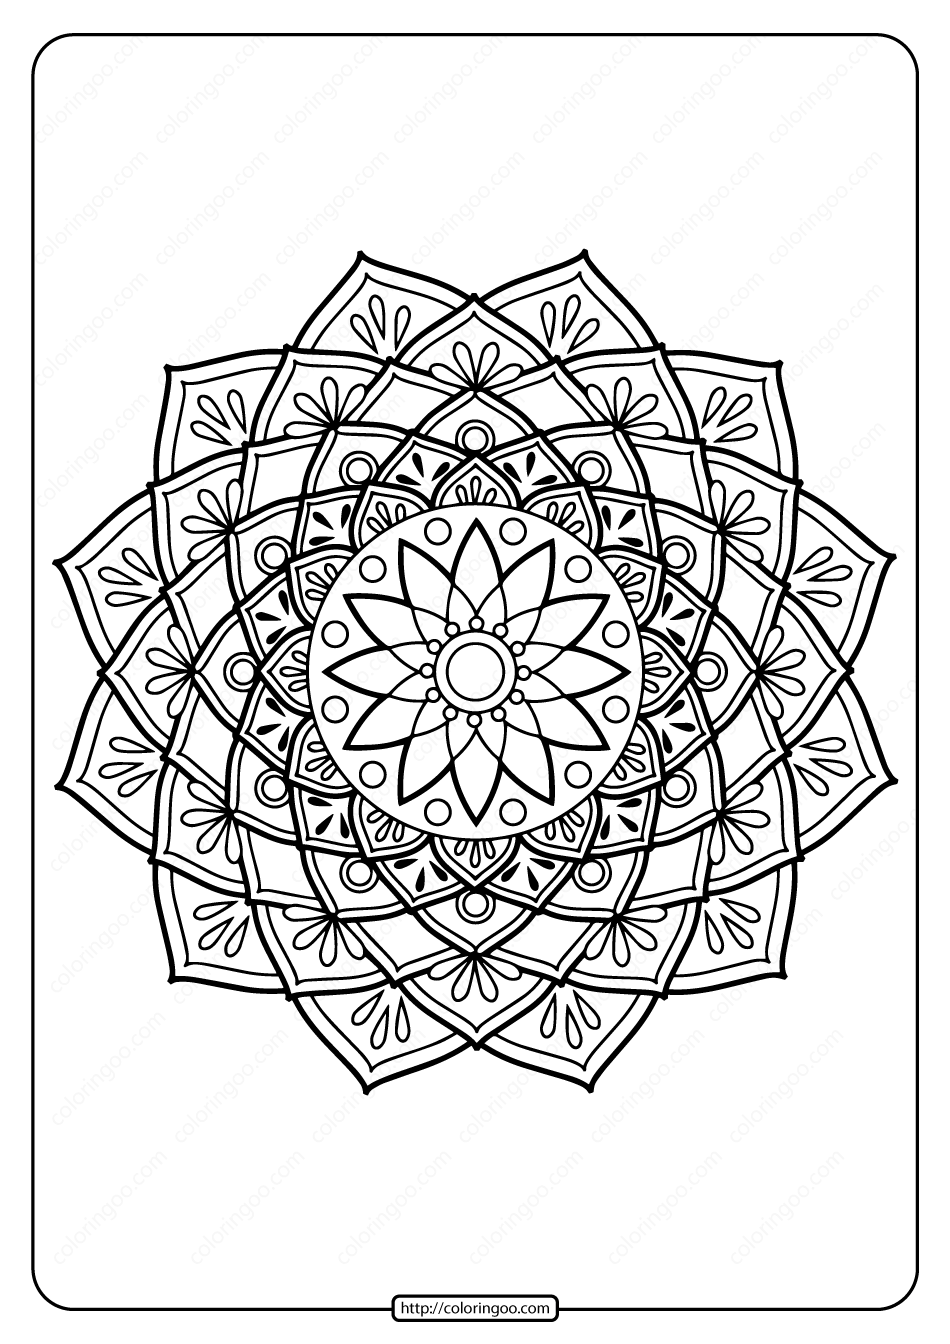 adult coloring pages book 25